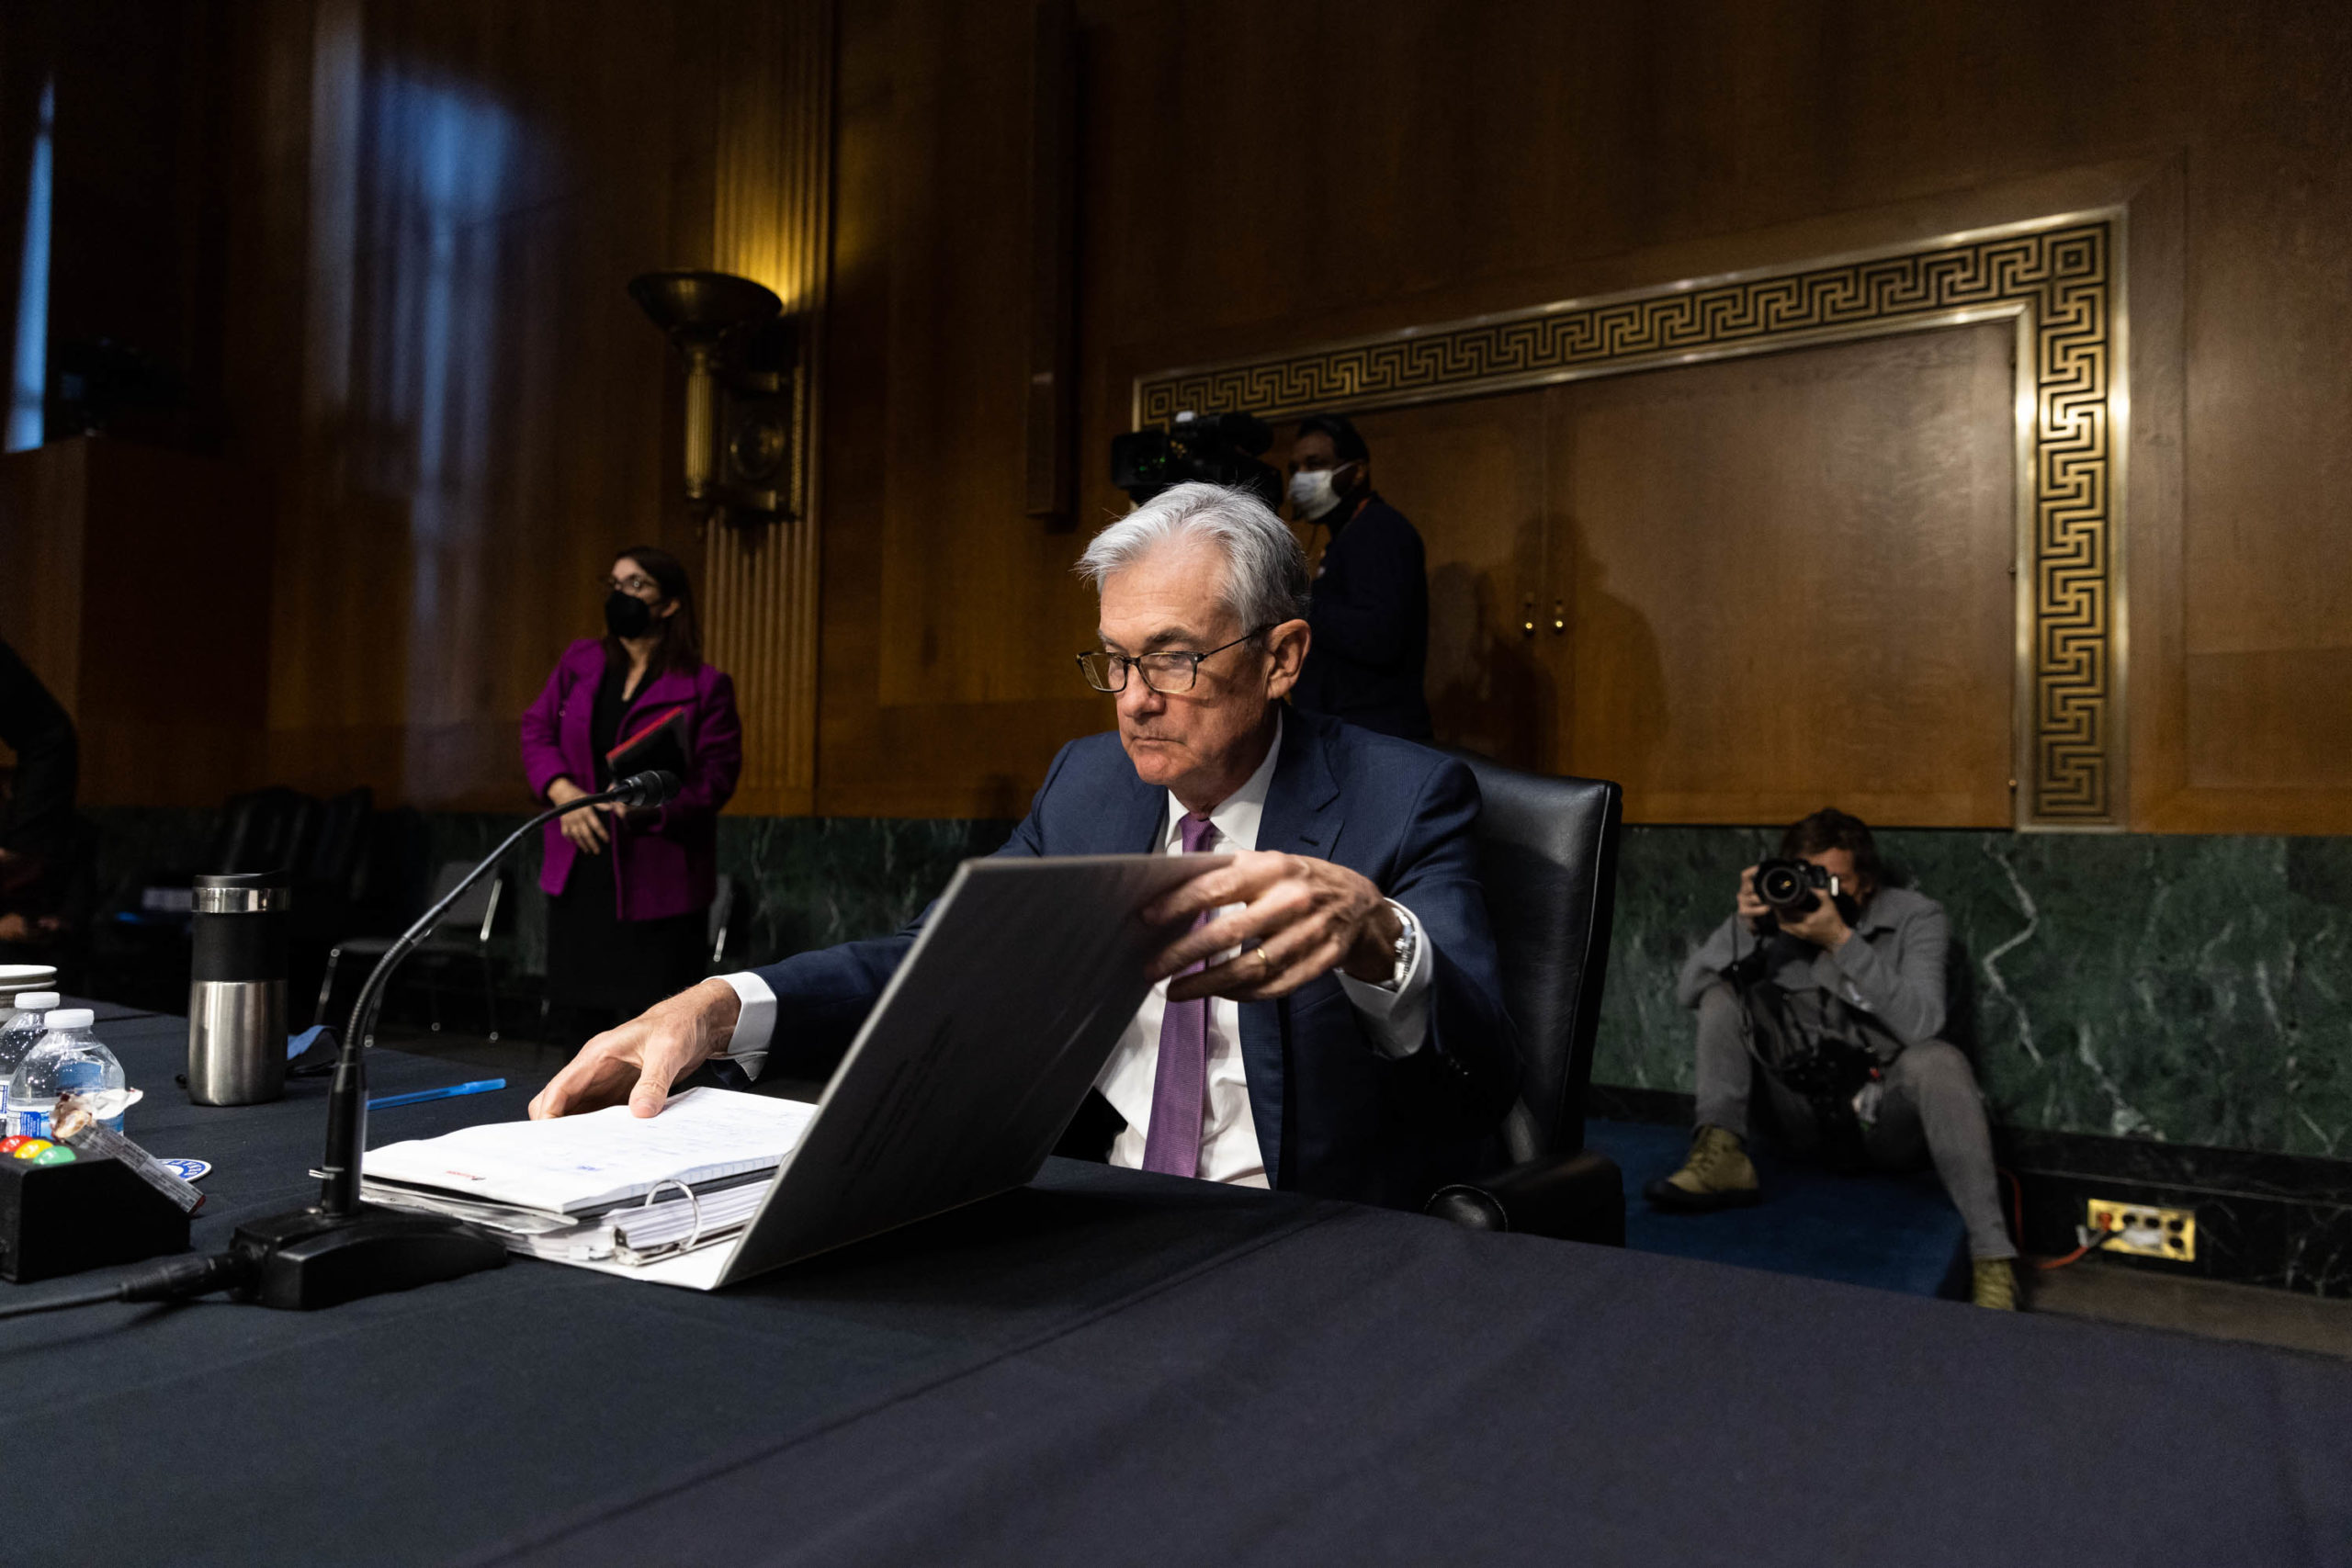 Jerome H. Powell, Chair of the Board of Governors of the Federal Reserve, prepares to leave at the end of a confirmation hearing before the Senate Banking, Housing and Urban Affairs Committee on January 11, 2022 in Washington, DC. (Photo by Graeme Jennings-Pool/Getty Images)